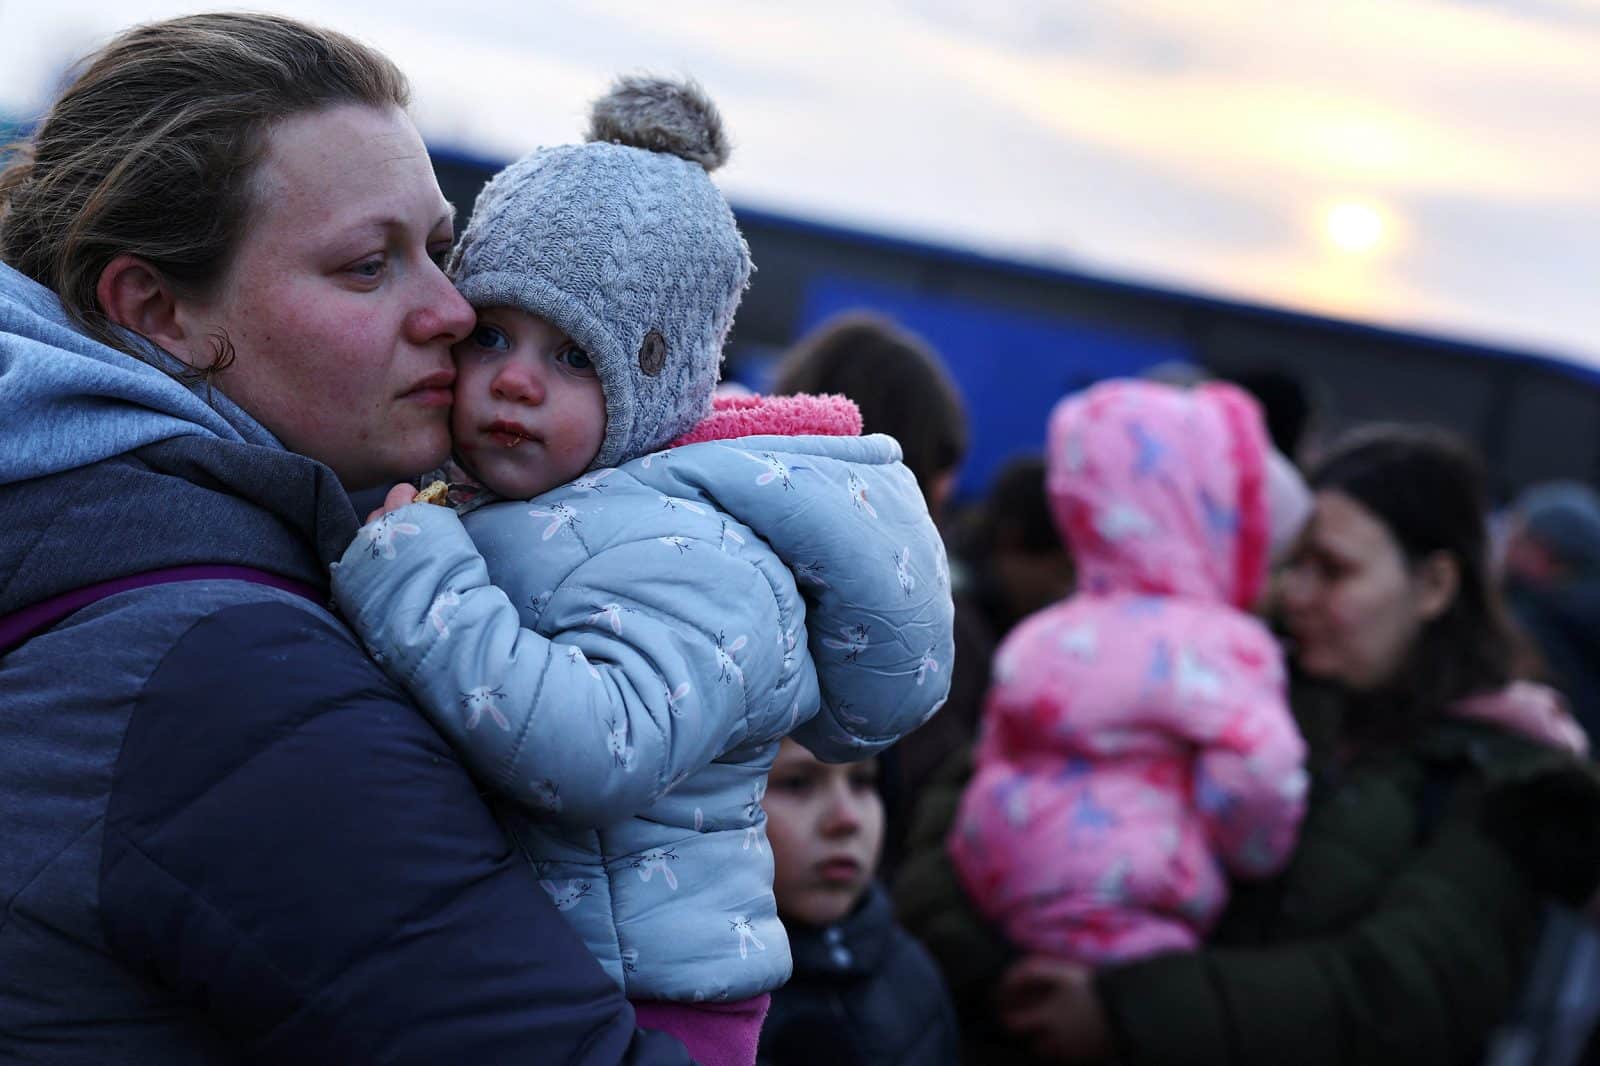 Ukrainian refugees who remain in the EU will contribute to the economic development